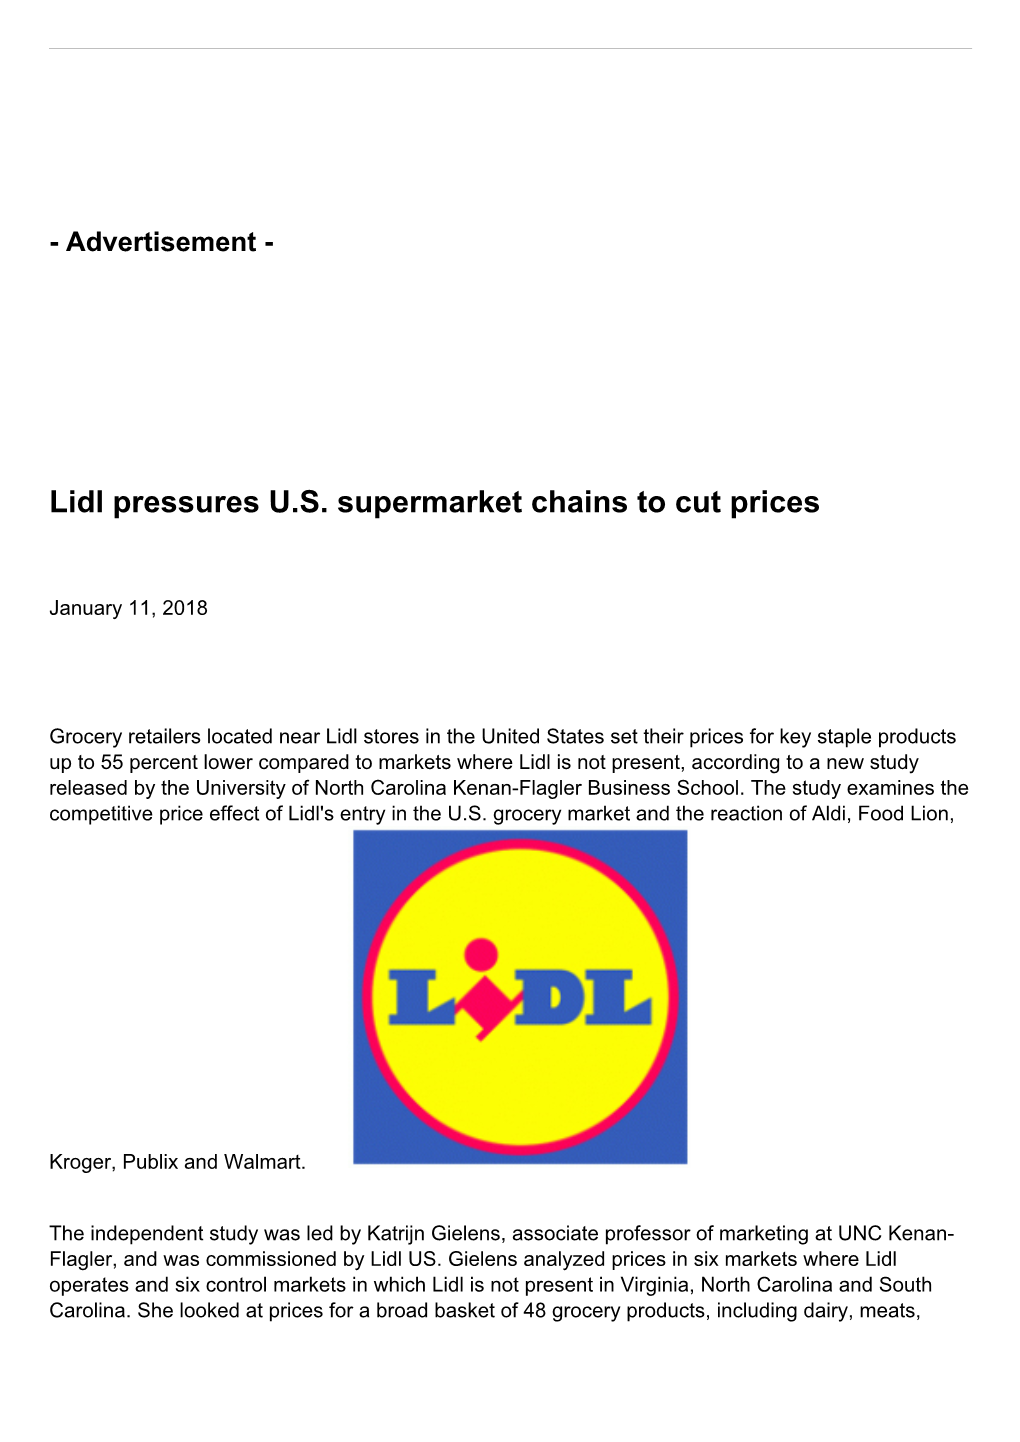 Lidl Pressures U.S. Supermarket Chains to Cut Prices